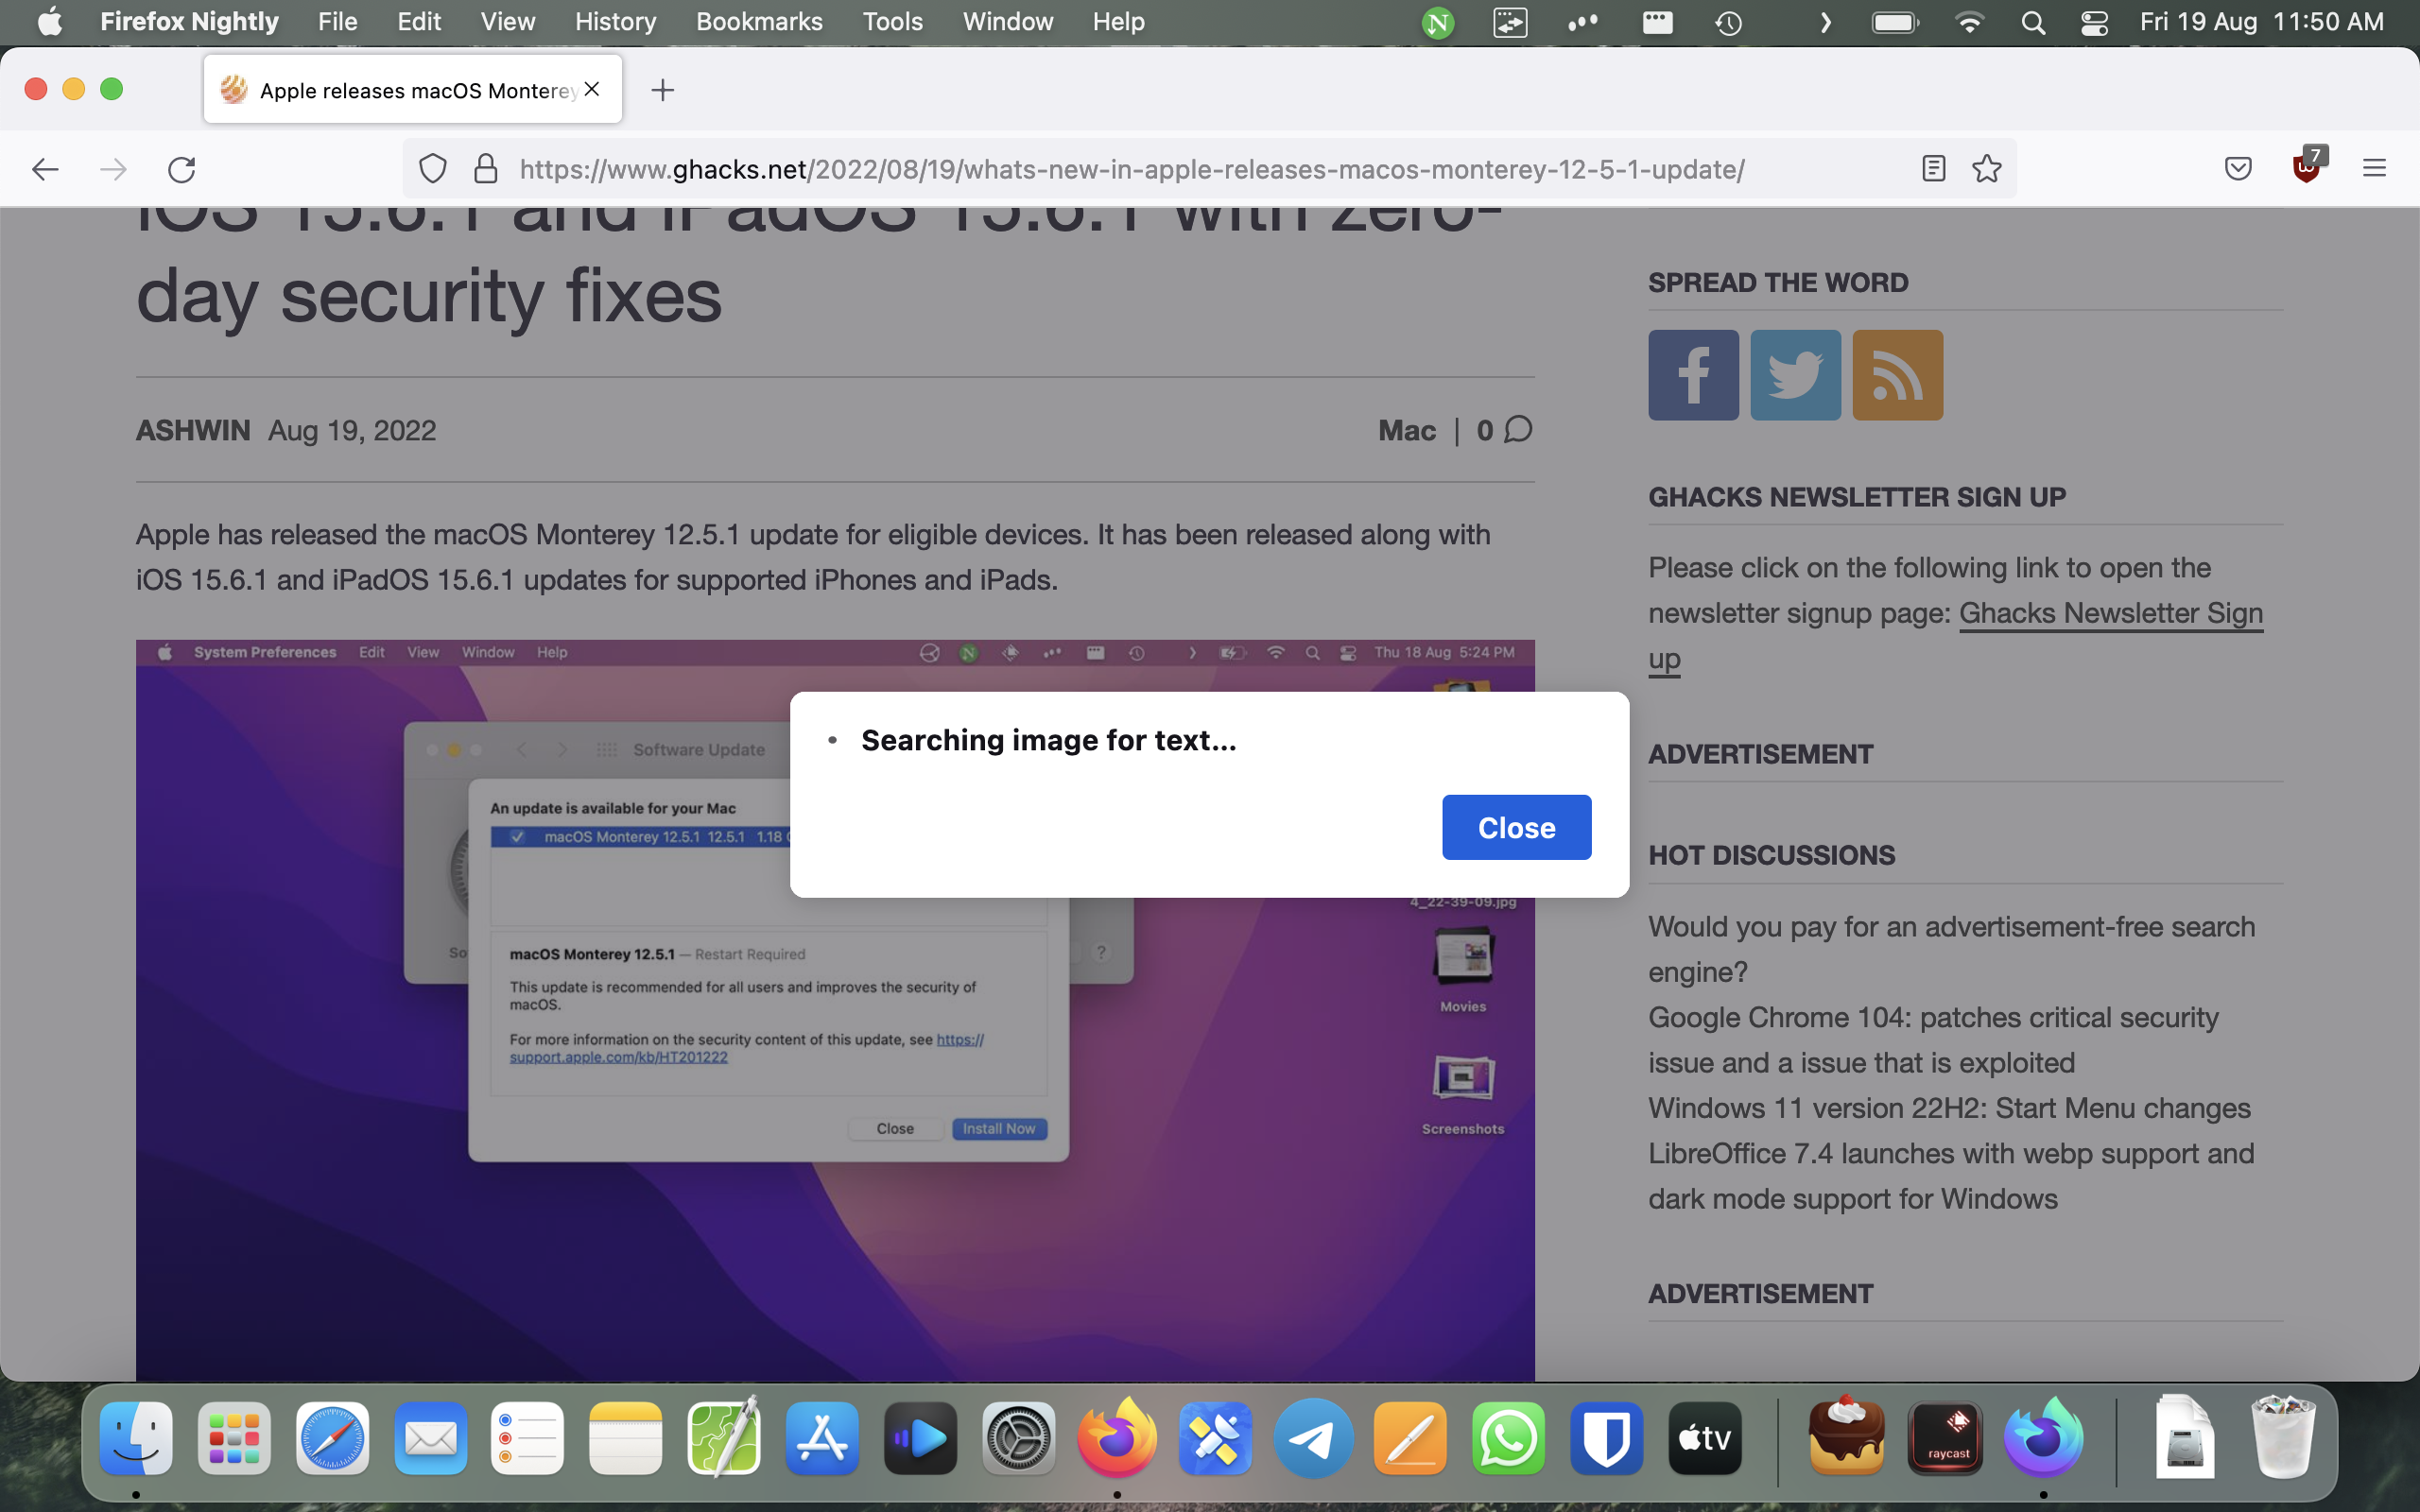 Mozilla plans to add Text Recognition support to Firefox